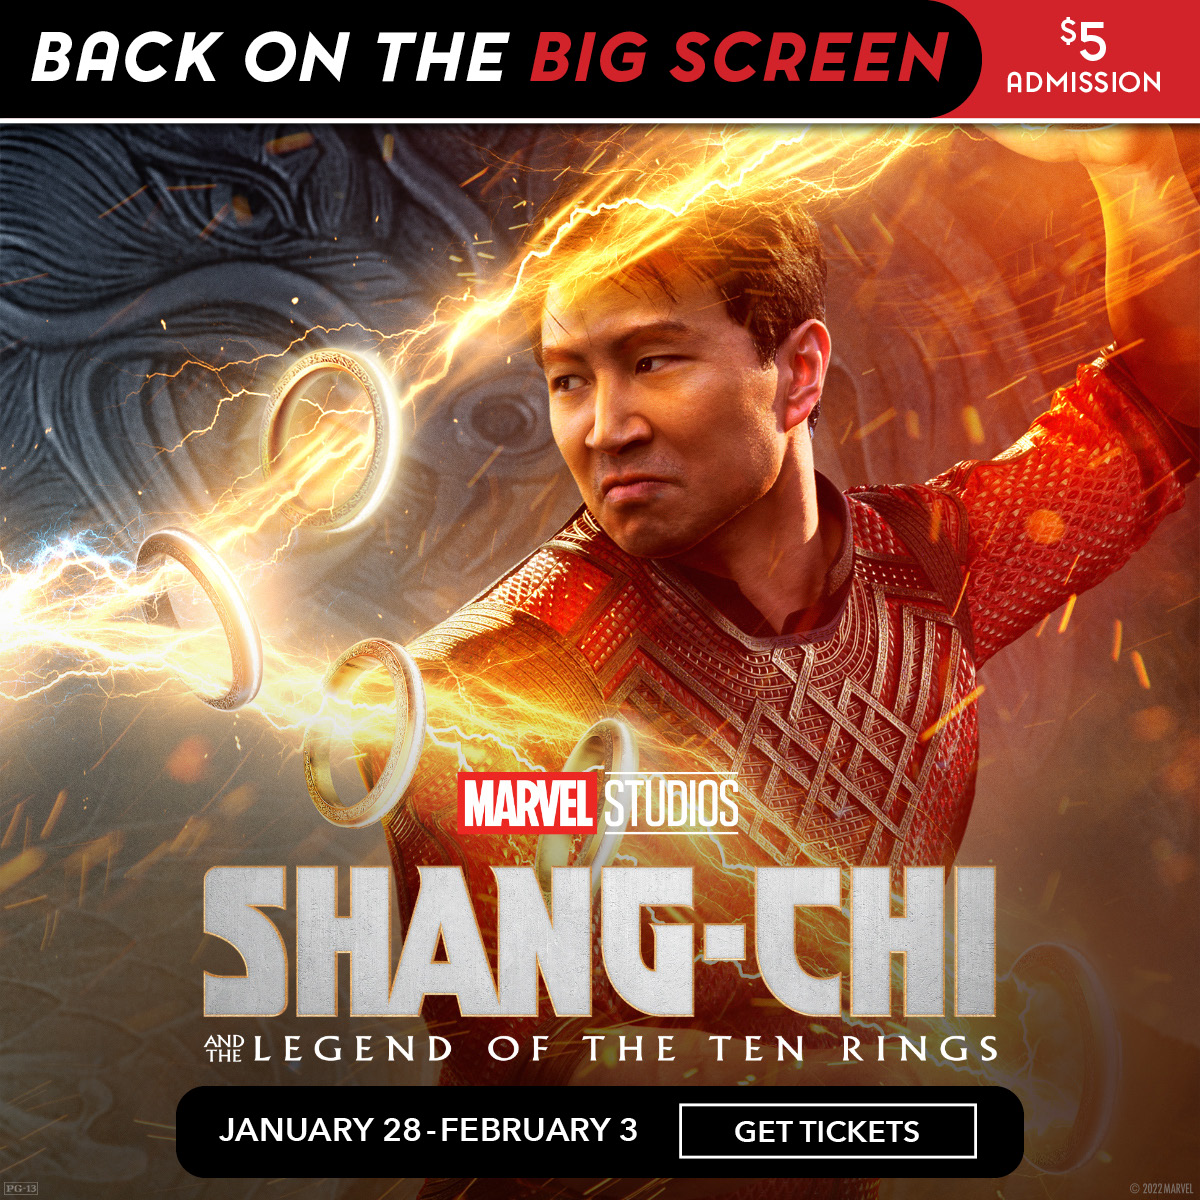 Have you heard the BIG news? #ShangChi and The Legend of The Ten Rings is BACK on the BIG screen TODAY! See it for $5. 🎟:  